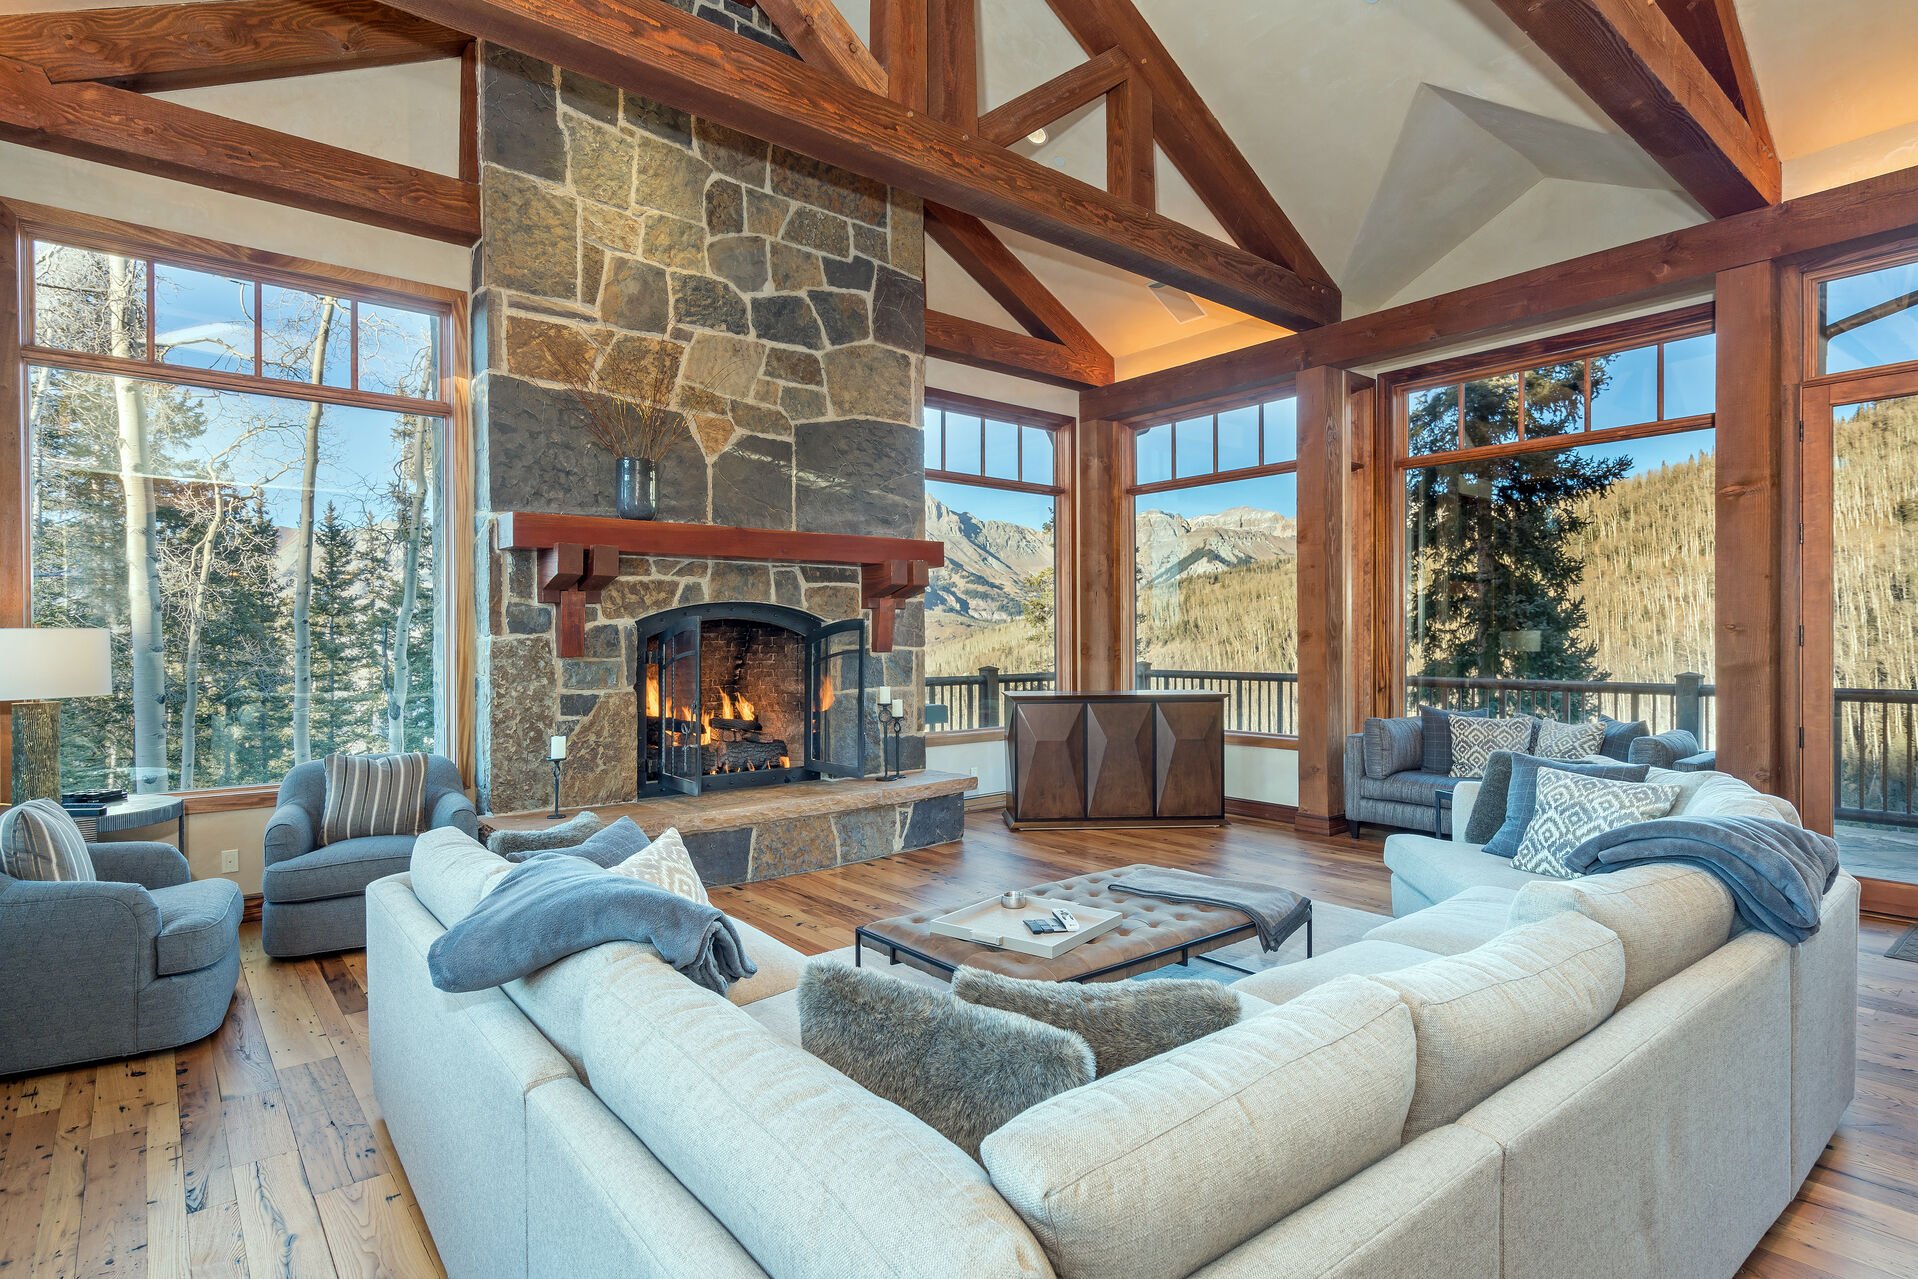 A large living area with a grand fireplace